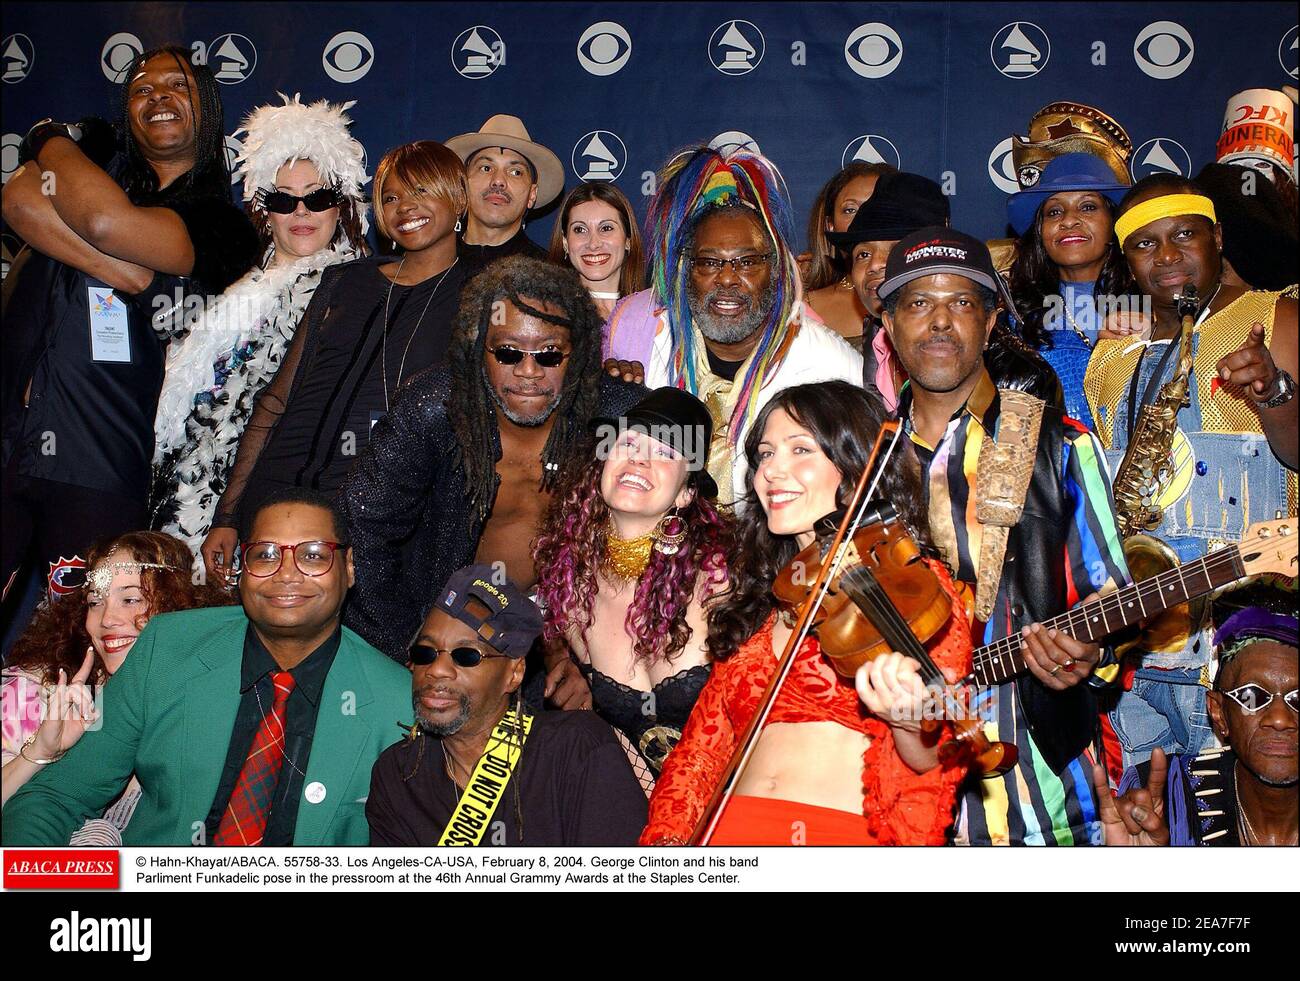 Hahn-Khayat/ABACA. 55758-33. Los Angeles-CA-USA, February 8, 2004. George  Clinton and his band Parliament Funkadelic pose in the pressroom at the  46th Annual Grammy Awards at the Staples Center Stock Photo -